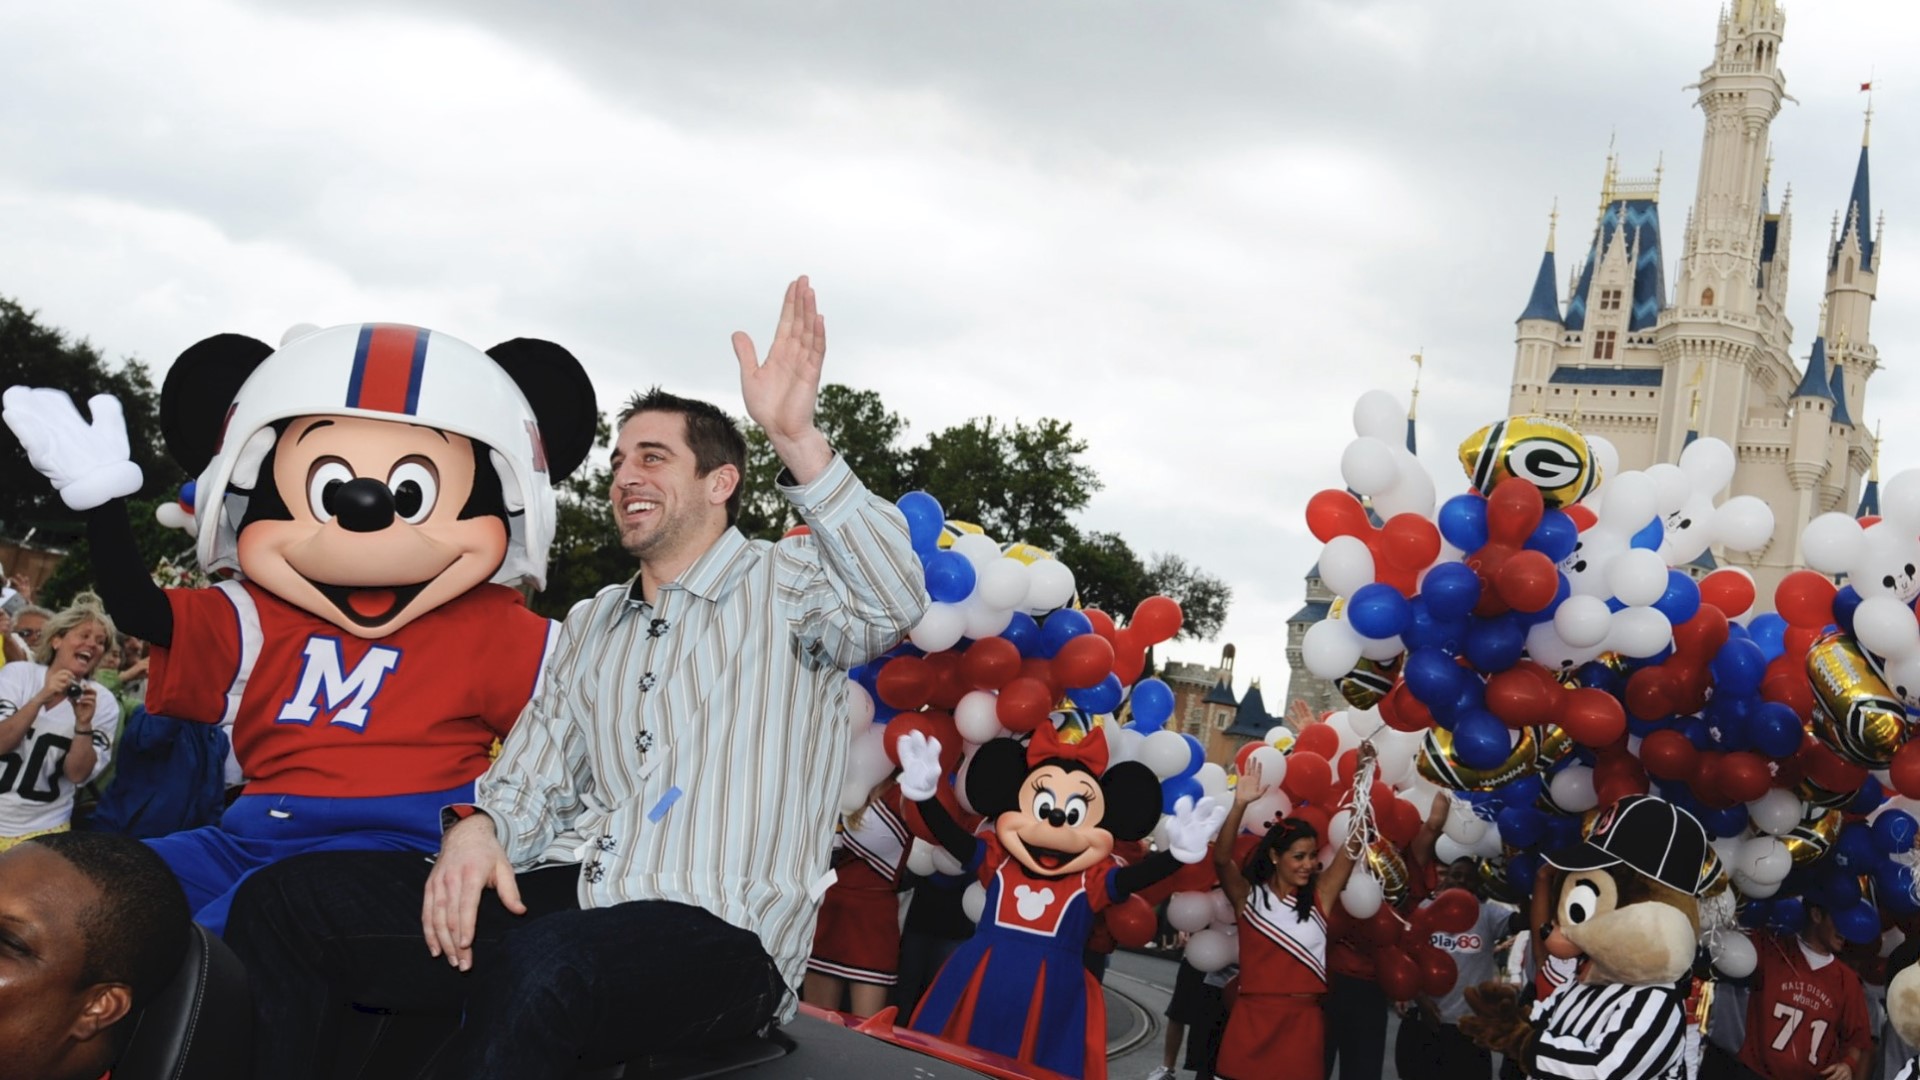 'I'm going to Disney World!' It's a phrase that Super Bowl MVPs have shouted for the past three decades, but why? Veuer's Justin Kircher explains.